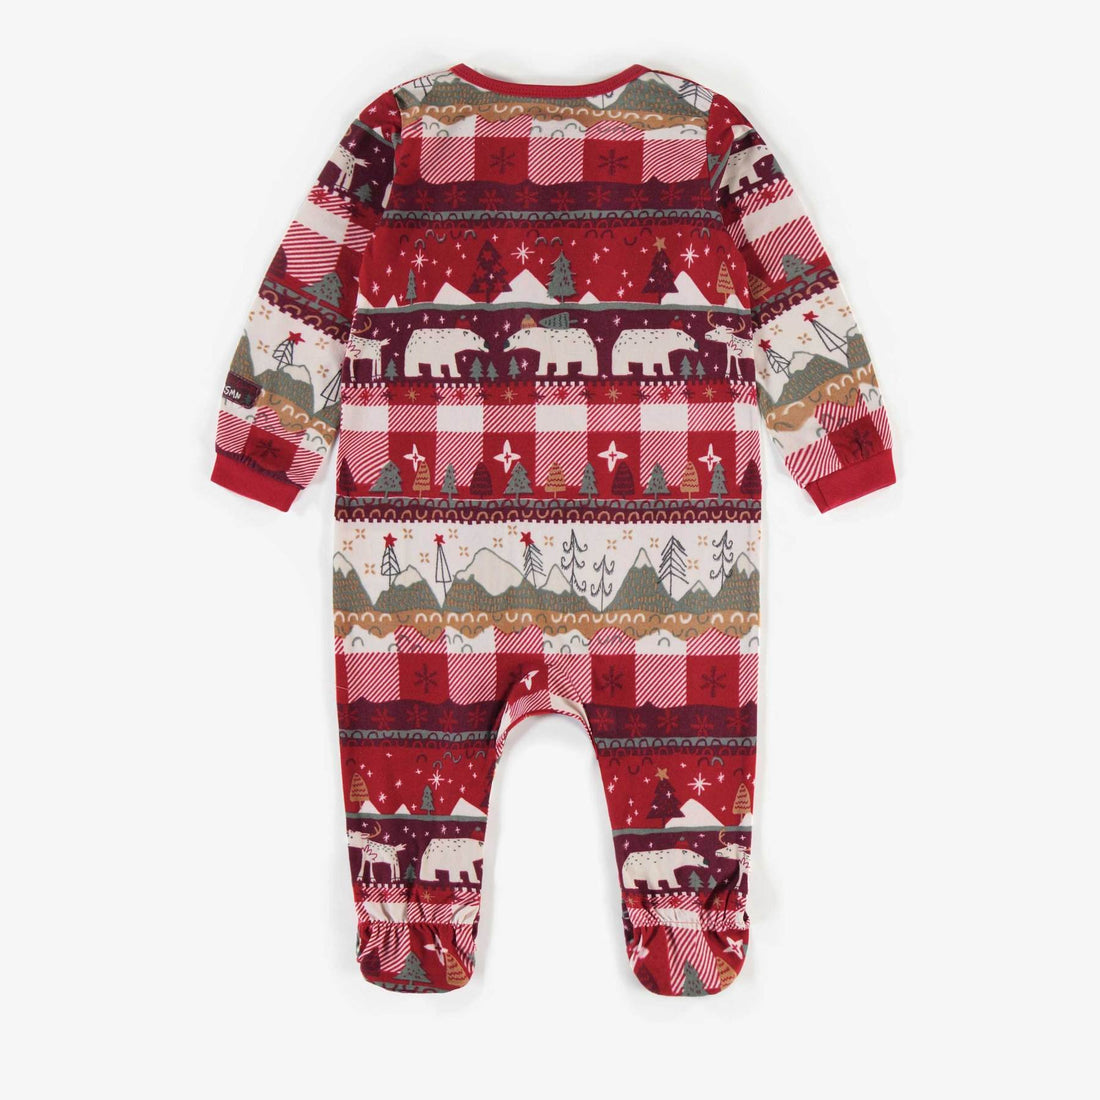 ONE-PIECE HOLIDAY PYJAMA IN BRUSHED POLYESTER, BABY